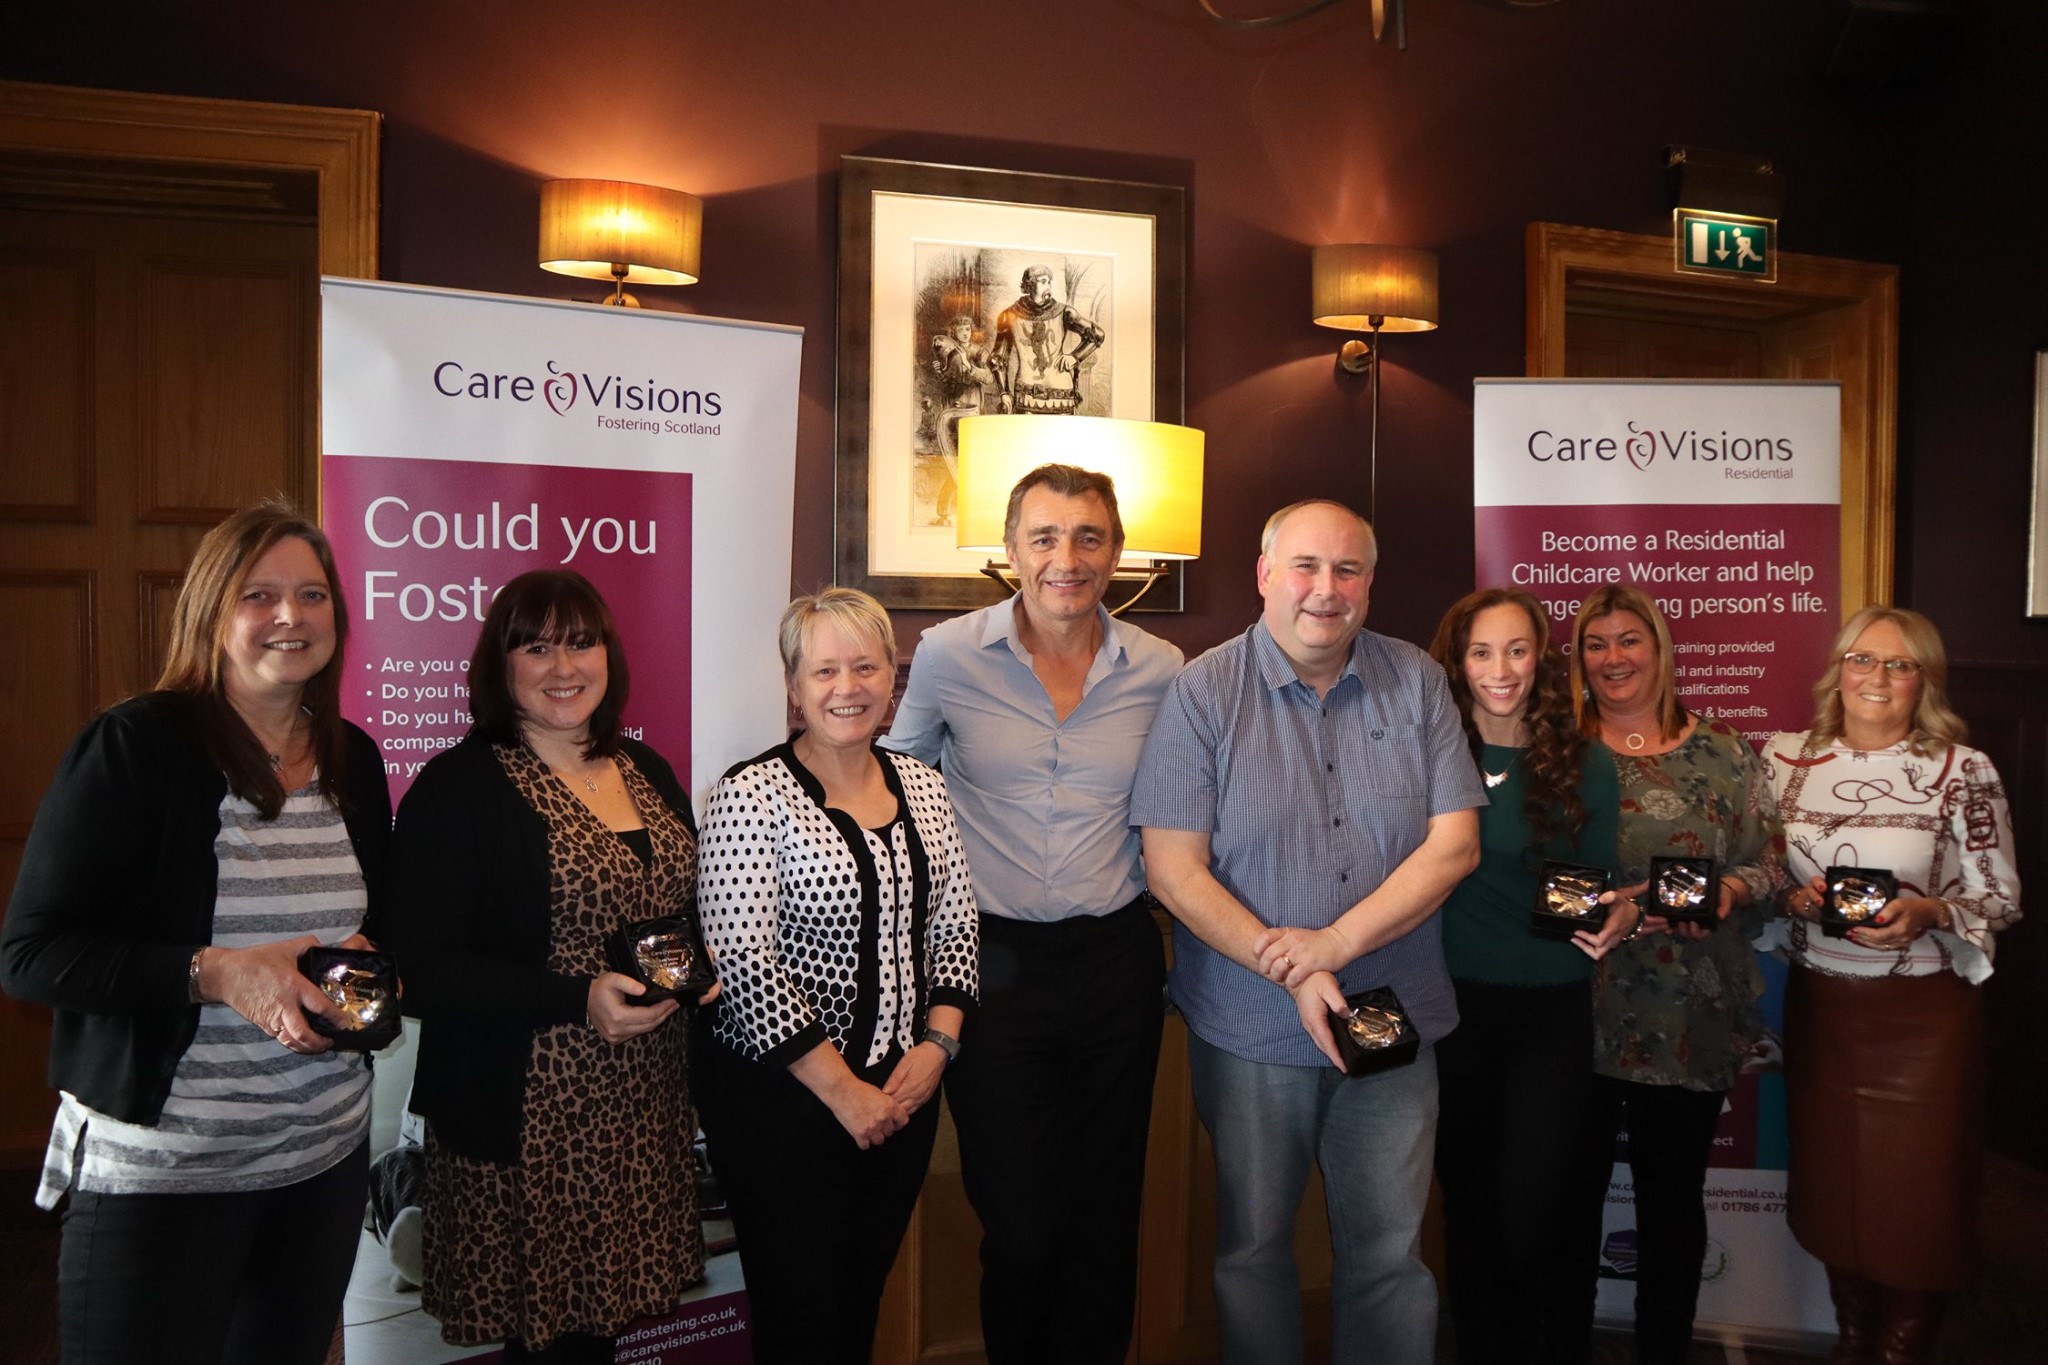 The award winners with Executive Chair of Children's Services Cathy Jamieson and Executive Chairman Mike Reid